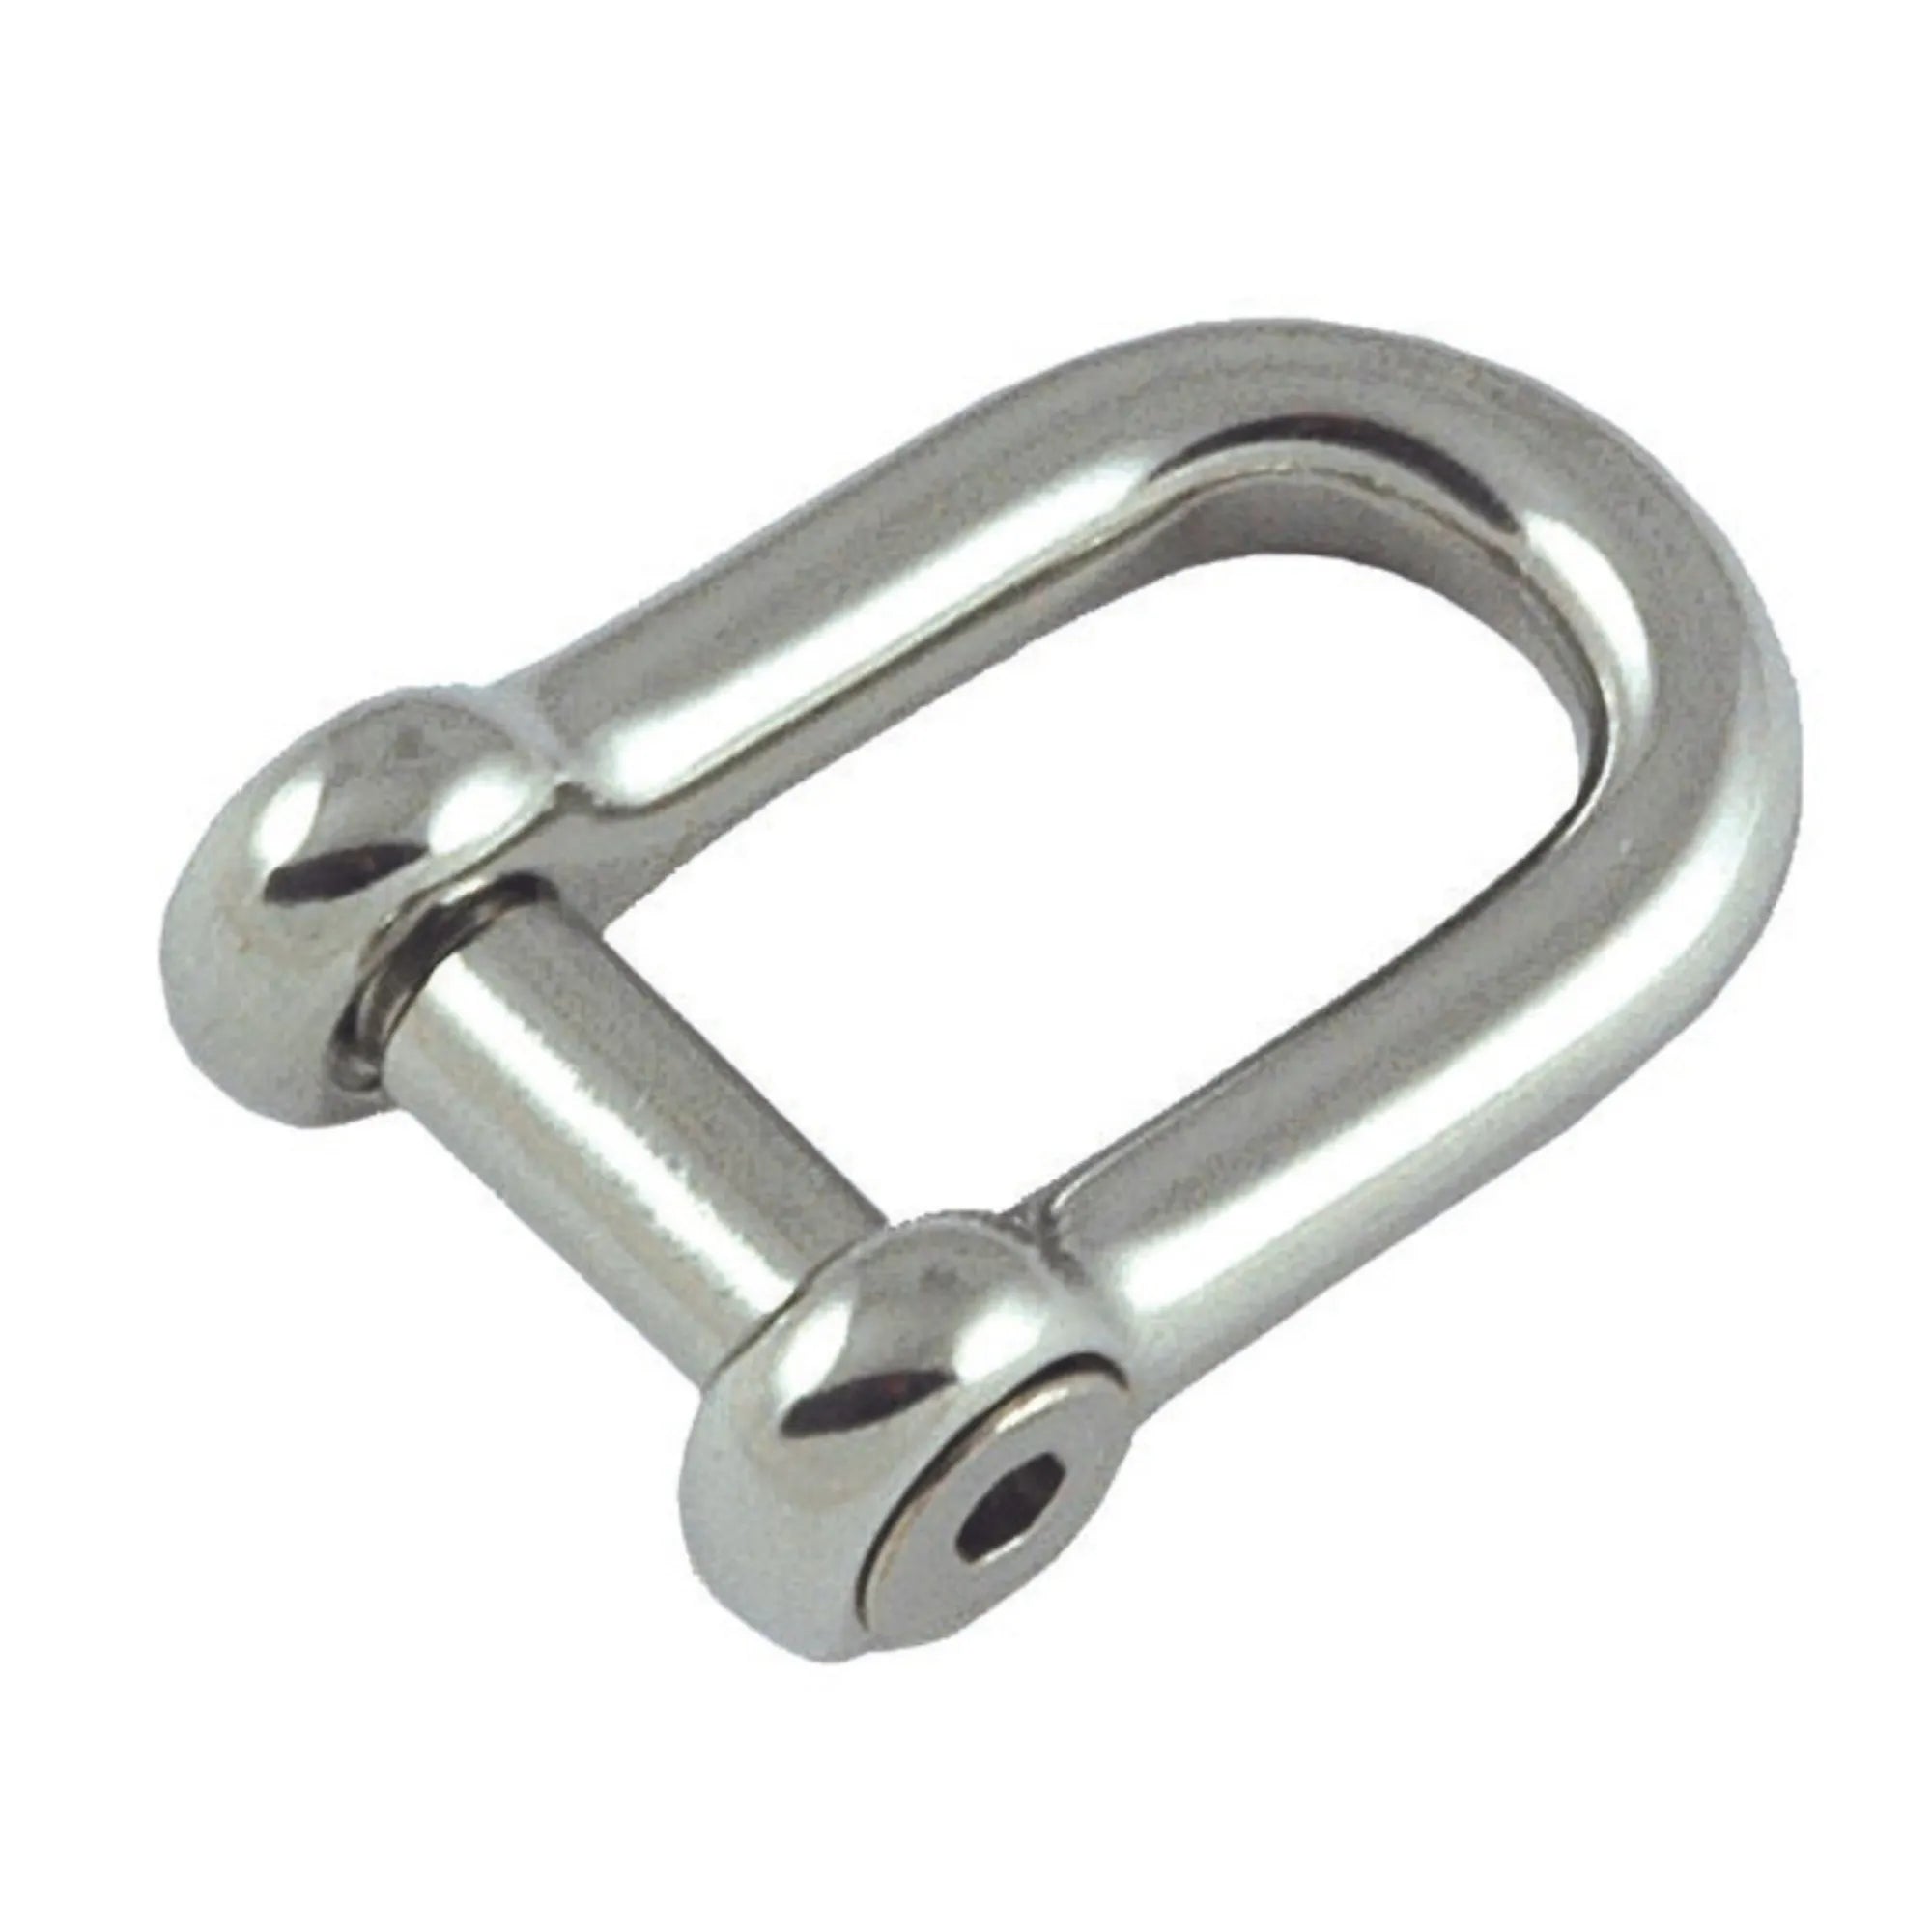 Stainless Steel Allen Pin D Shackle